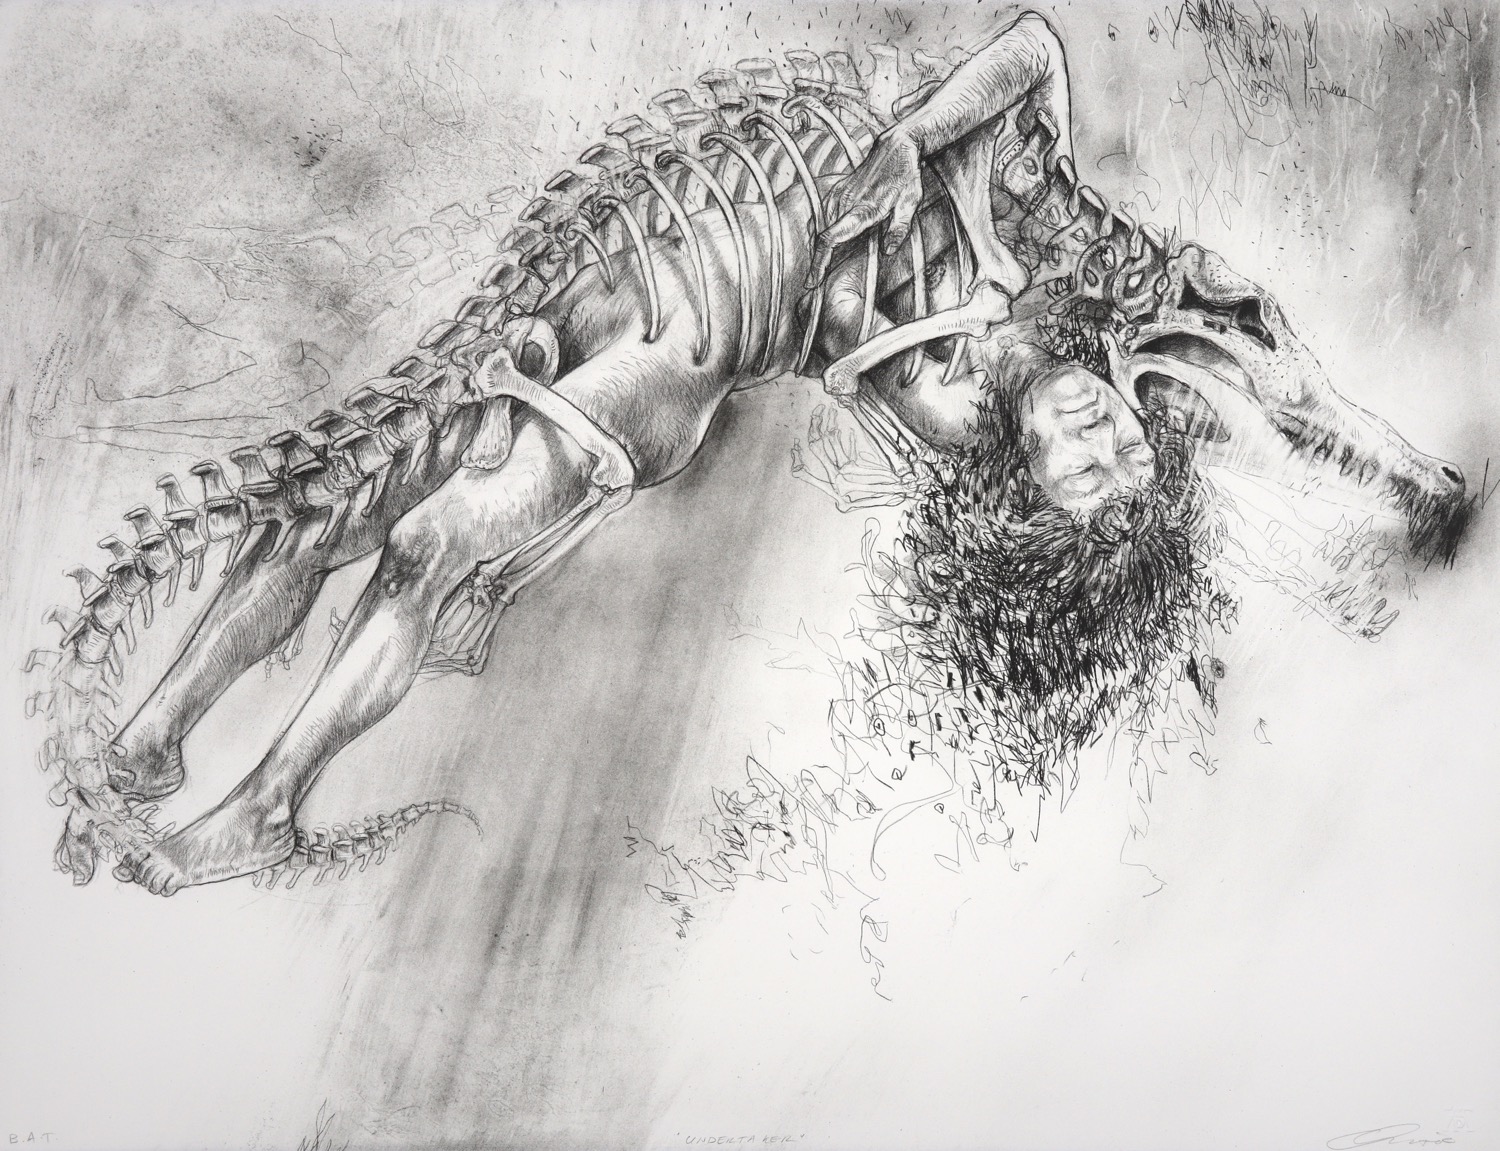 Crocodile skeleton drawn to mesh with the figure of a naked young woman.